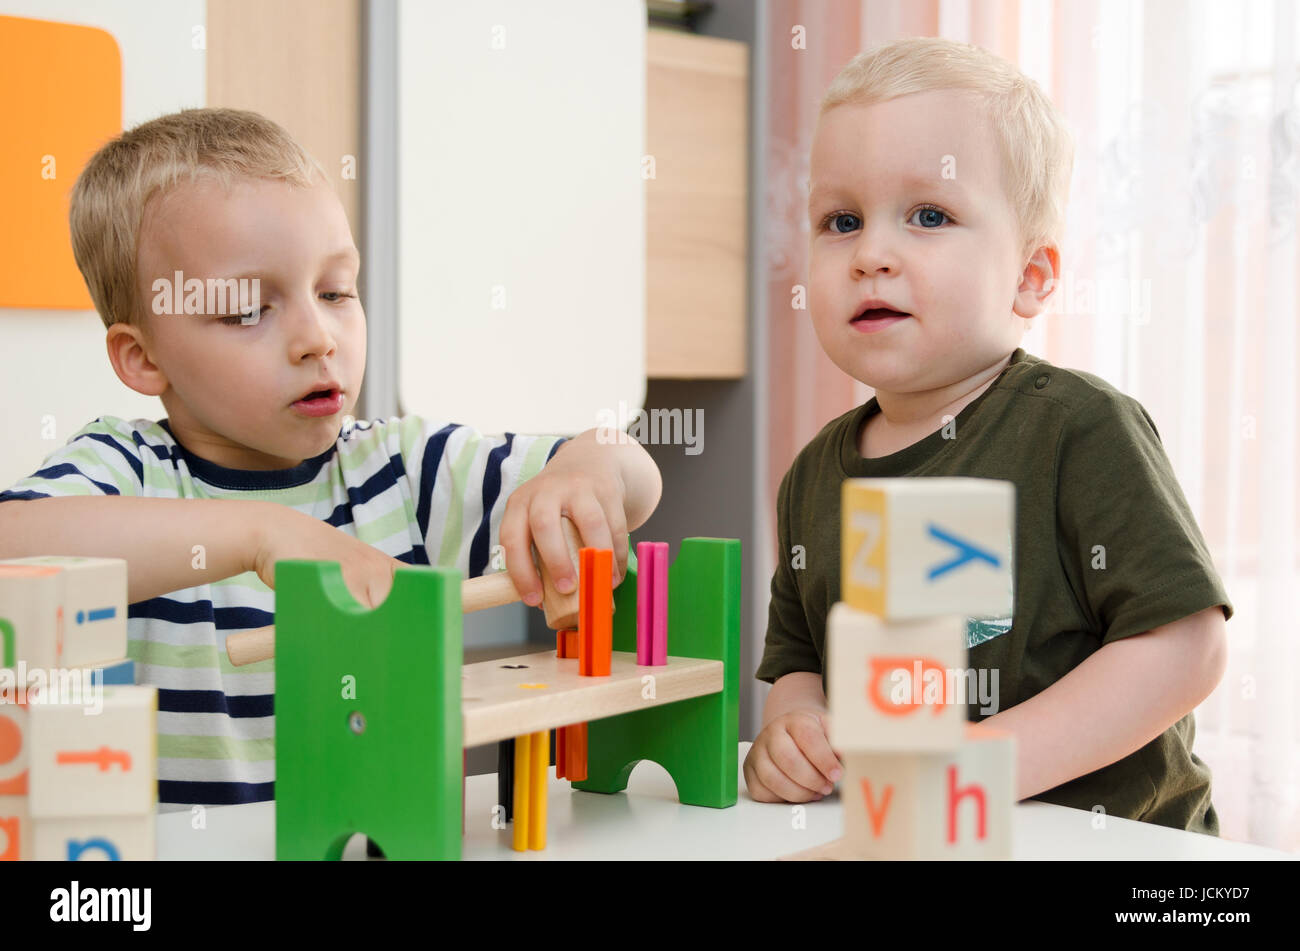 Kids boys playing with toy blocks at home or kindergarten. children kindergarten playing preschool daycare school child colorful concept Stock Photo